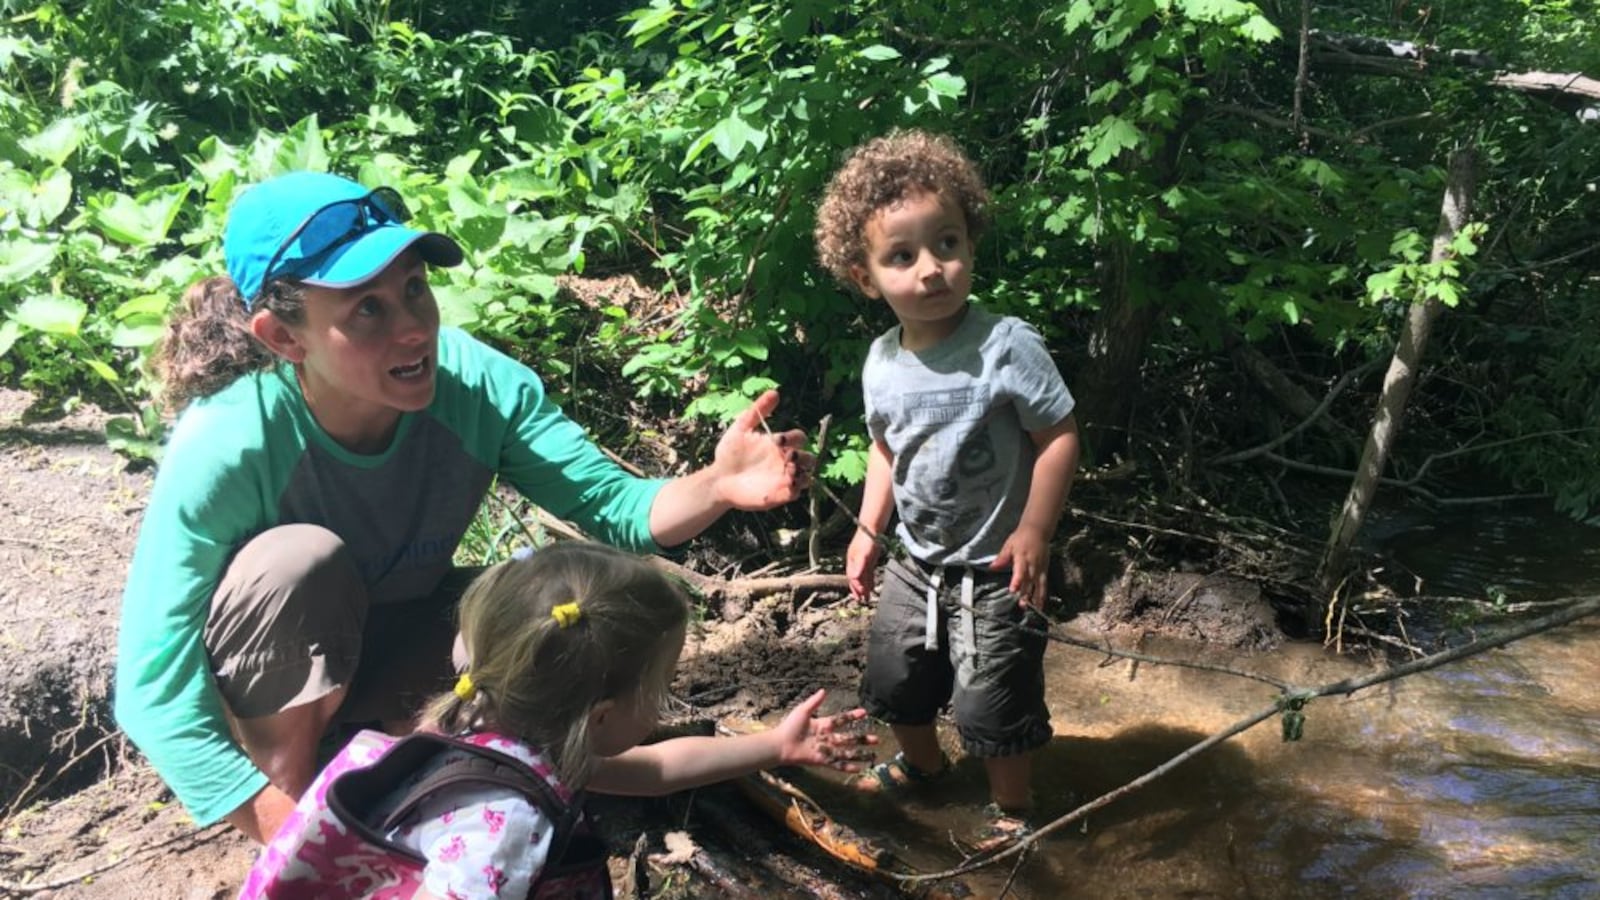 Megan Patterson works with children to make a dam in a creek during a recent “forest school” class.